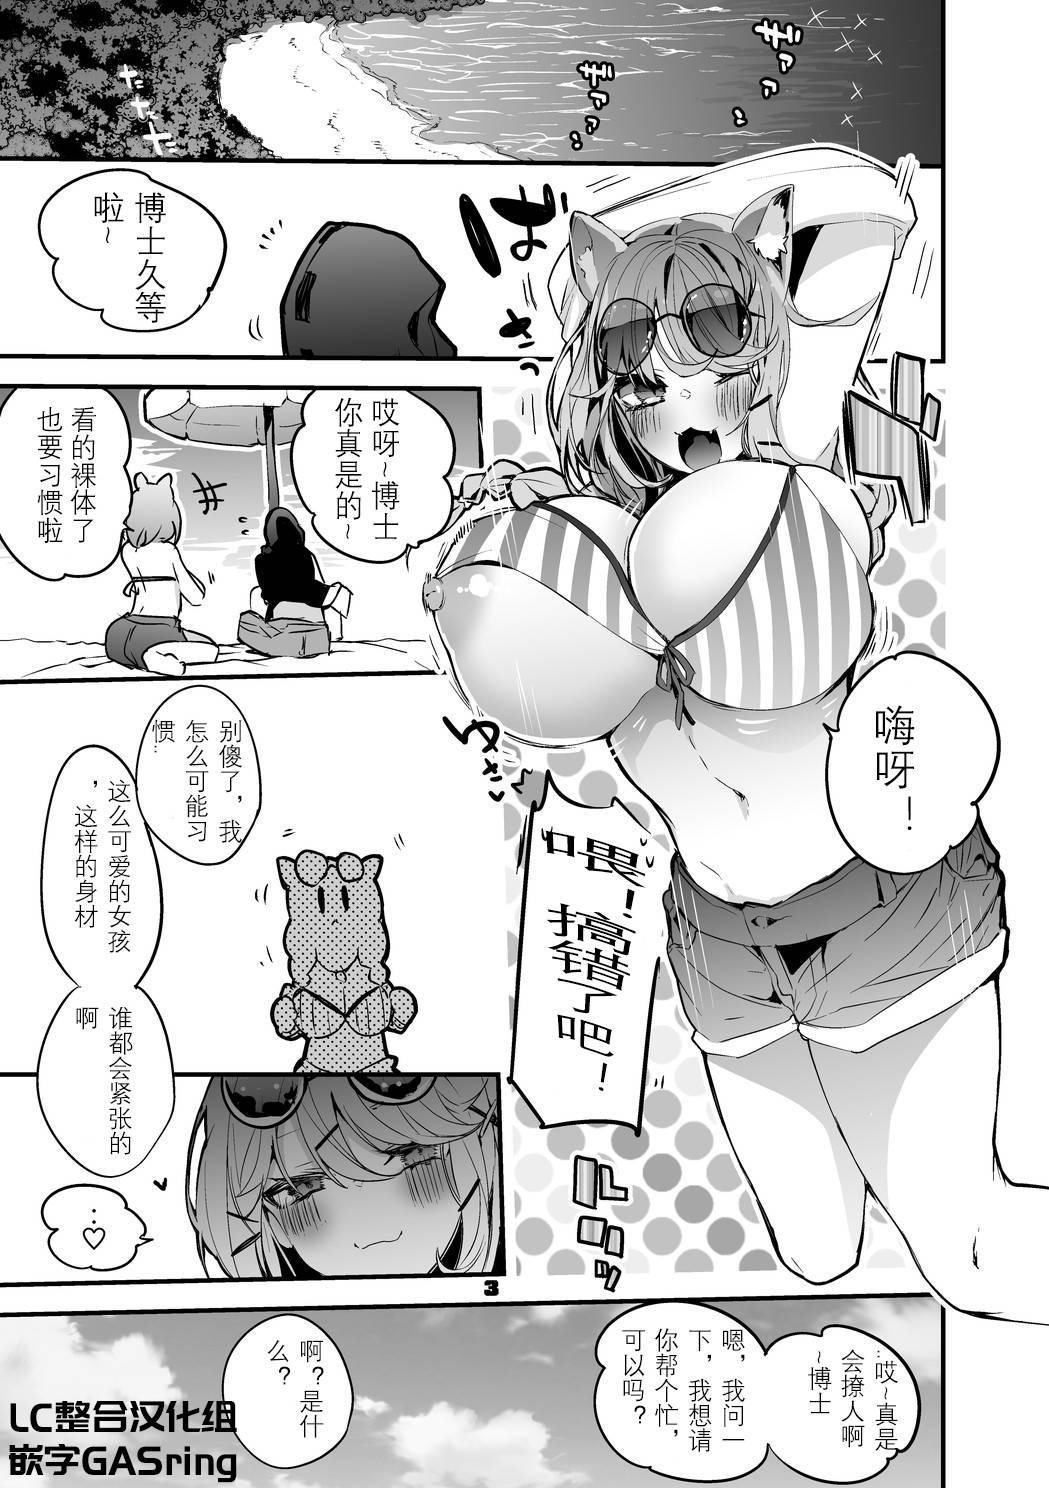 Sex Pussy Hakobune x Ero x Matome Hon 2 Ch. 1-2, 7 | りんごくらぶ的方舟x工口x总集篇 - Arknights Spandex - Page 3